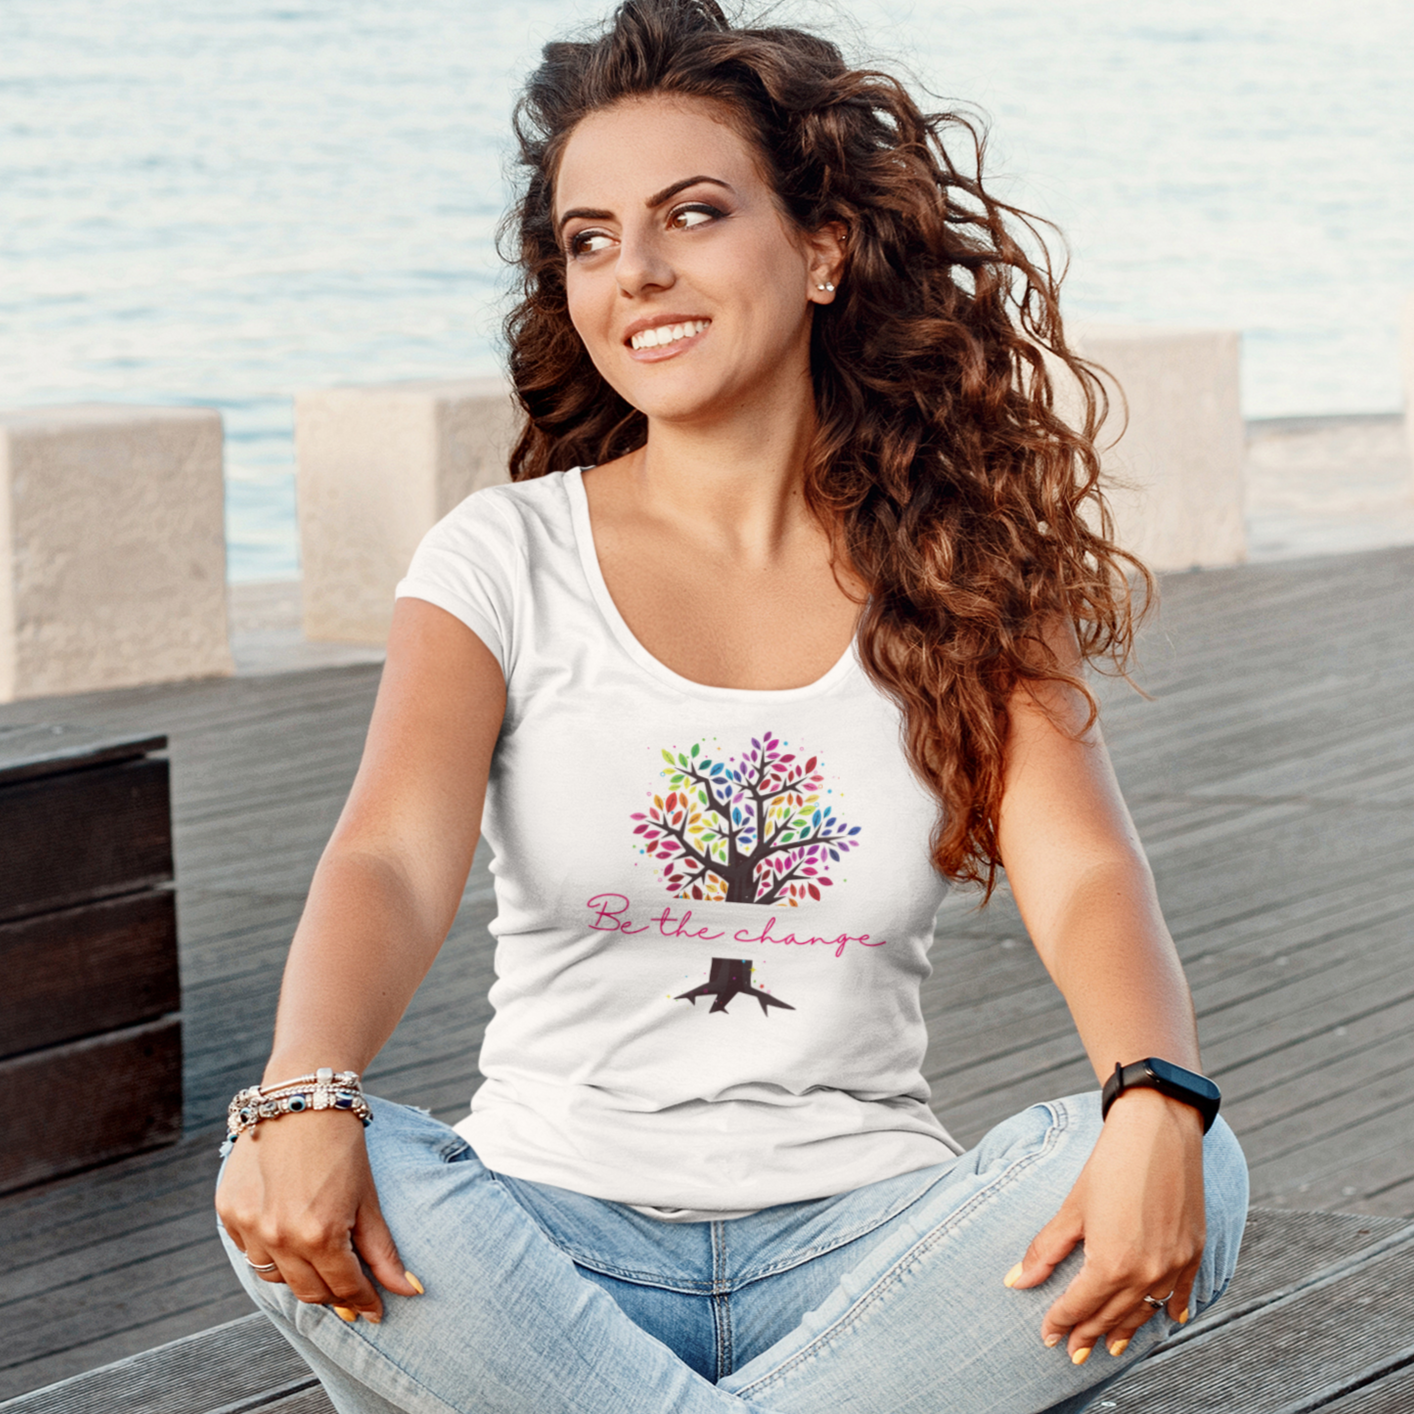 Story of Awakening Lifestyle Community Spirituality Relationships Love Light Meditation Oneness Earth Balance Healing Shop Store Charity Tree Nature Read Write T shirt Tops Tees Clothing Women Horoscope Be The Change Quote Colorful Tree Environment